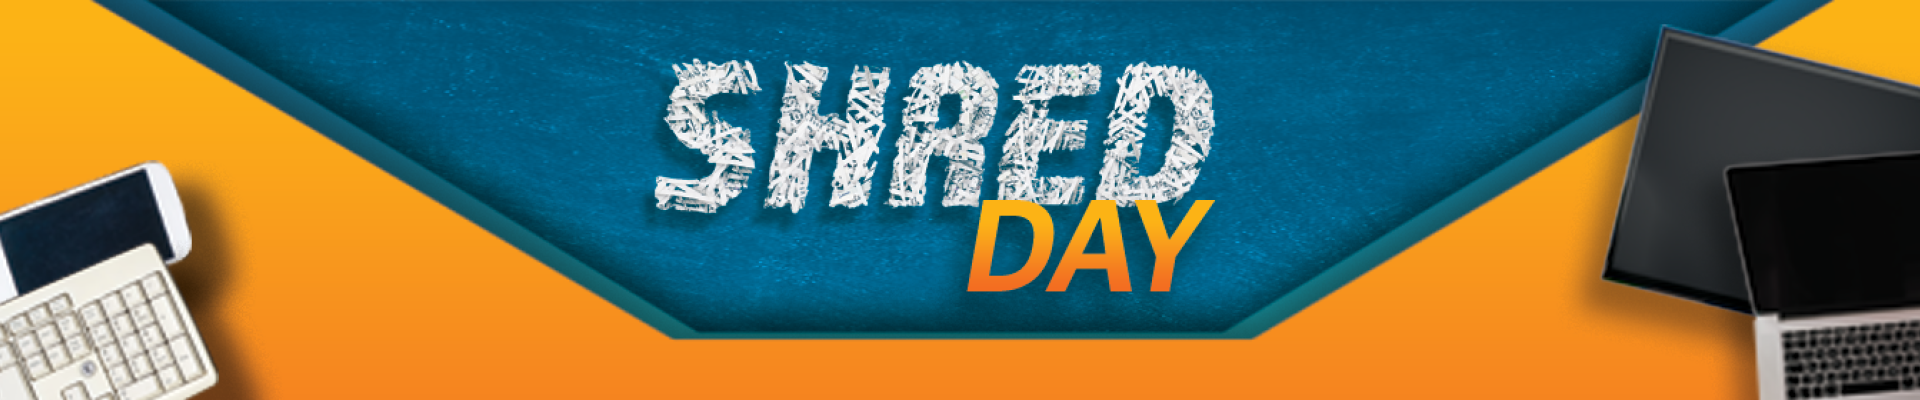 Shred Day banner